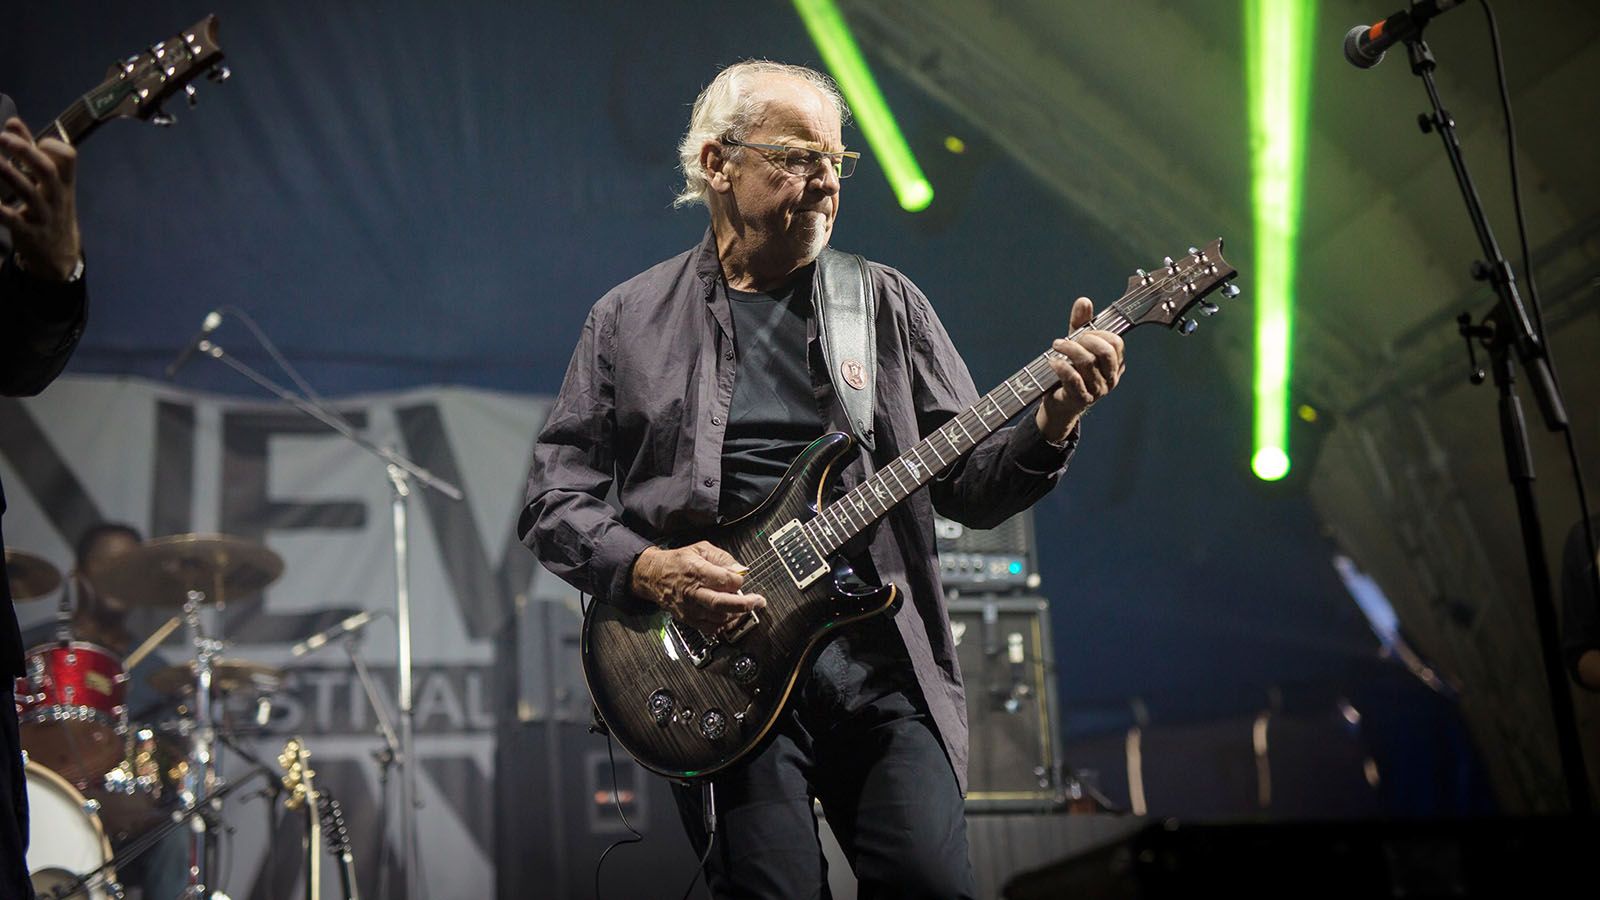 Jethro Tull's Martin Barre will be at Eagles Theatre in Wabash on Oct. 19.